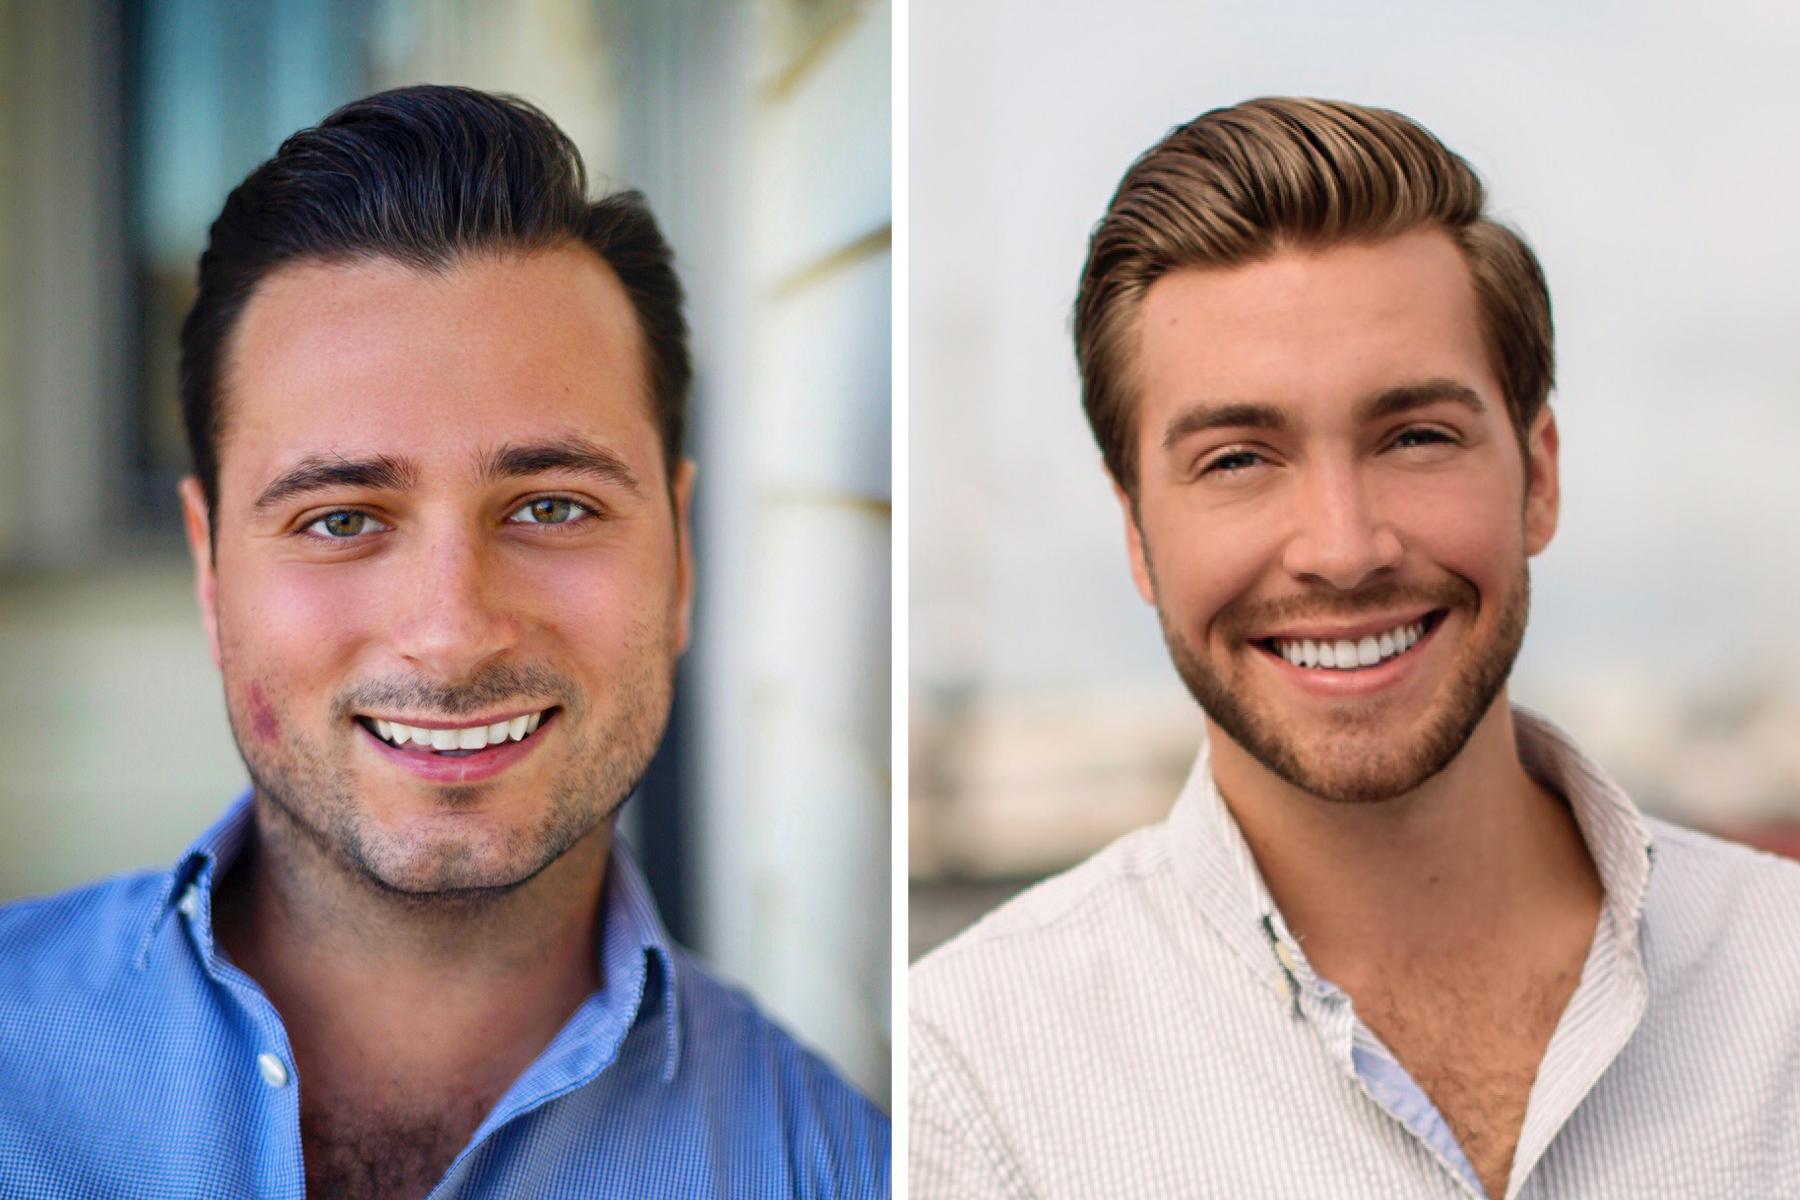 LILA DELMAN REAL ESTATE NAMES RYAN ELSMAN AS CHIEF OPERATING OFFICER AND BRANDYN BRUNELLE AS CHIEF CREATIVE OFFICER